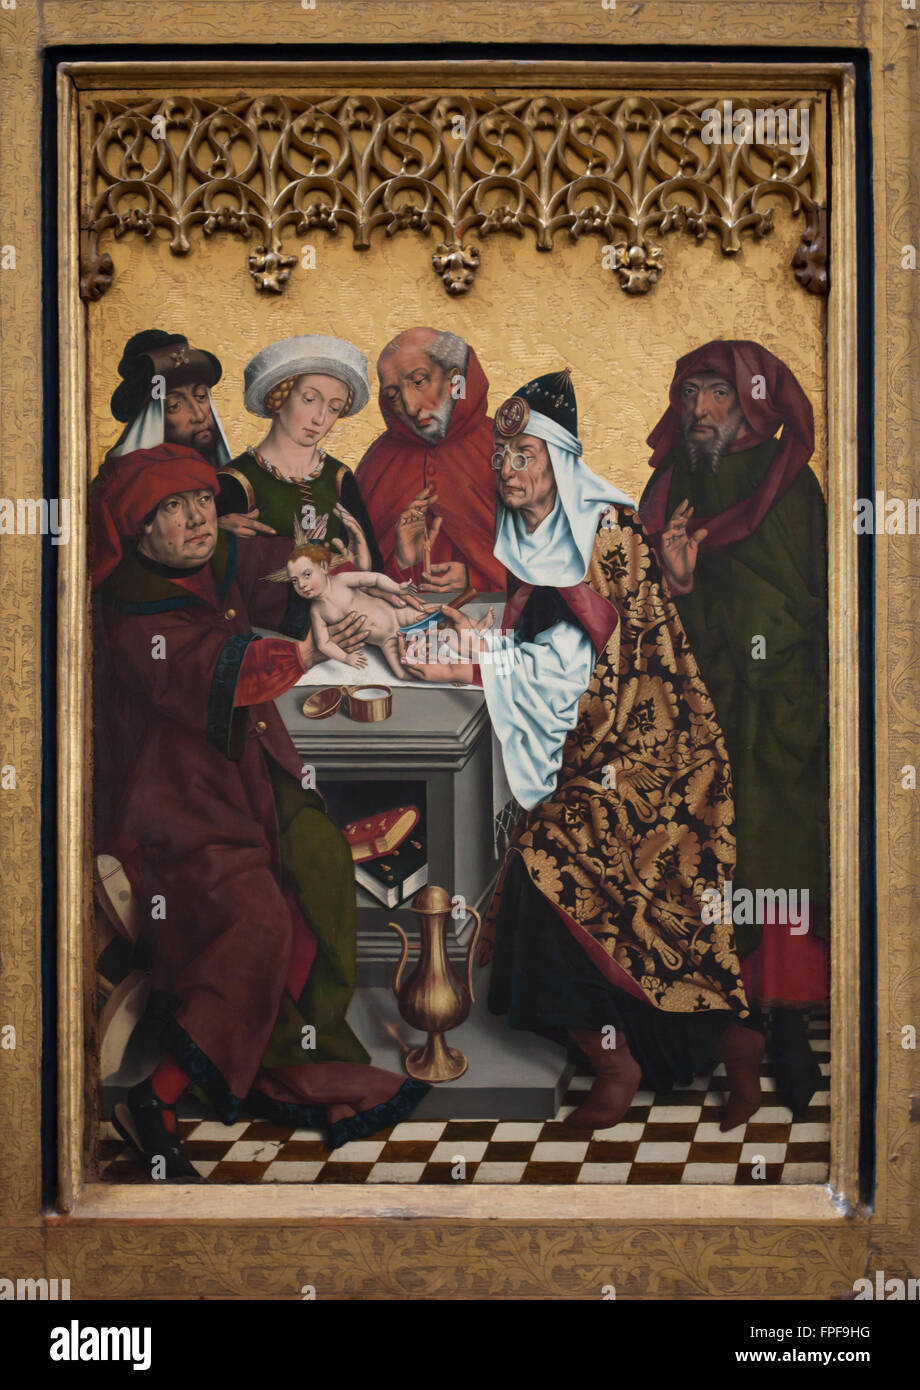 Circumcision of Jesus. Detail of the Twelve Apostles Altarpiece (1466) by German painter Friedrich Herlin in Saint James' Church in Rothenburg ob der Tauber, Middle Franconia, Bavaria, Germany. Stock Photo